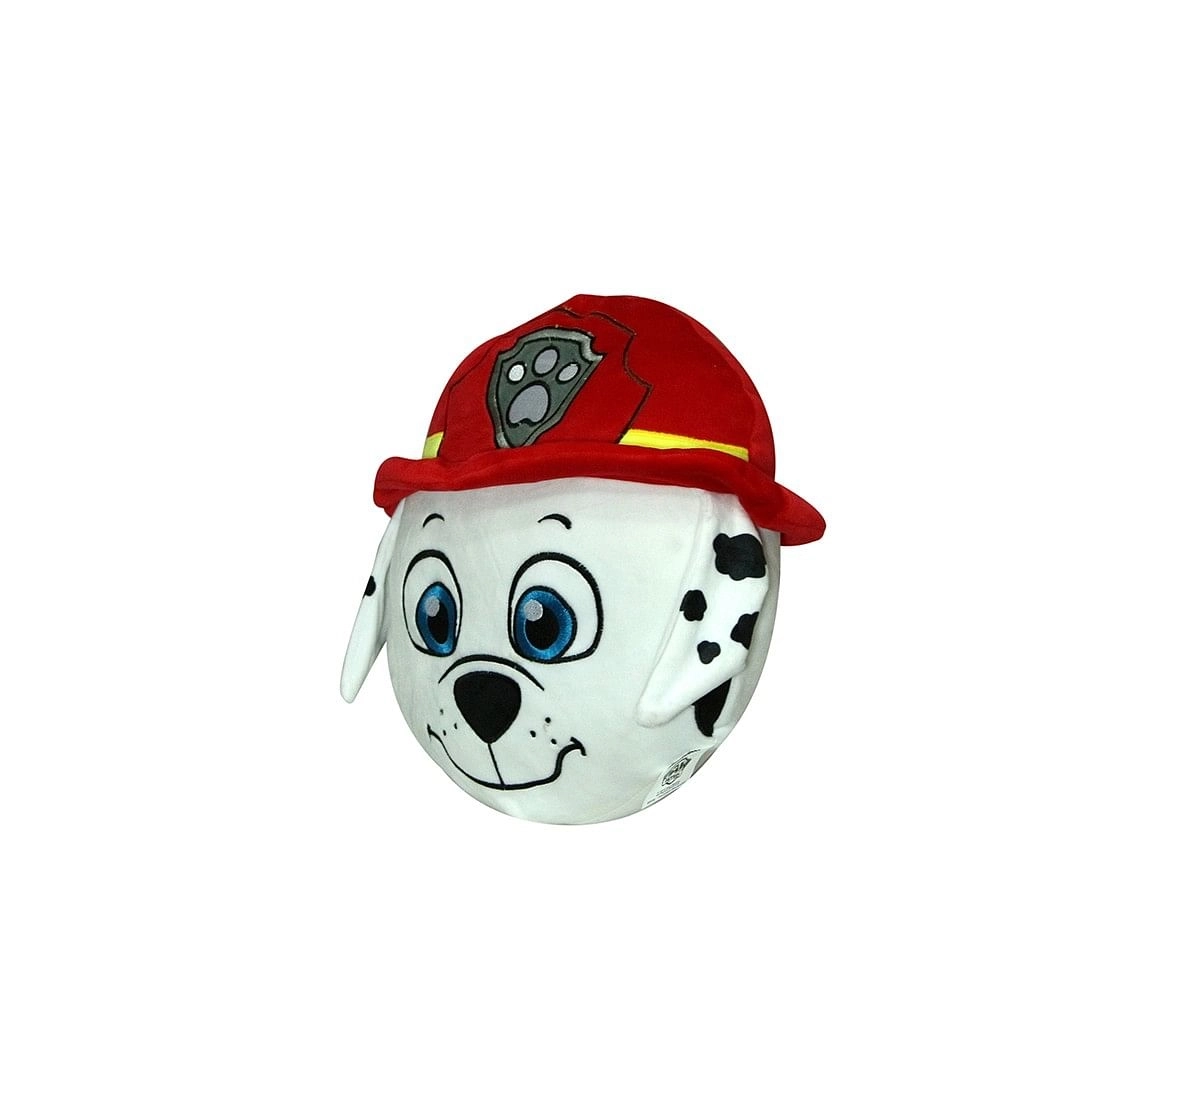  Paw Patrol Face Playtoy Marshall Plush Accessories for Kids age 12M+ - 30.48 Cm 